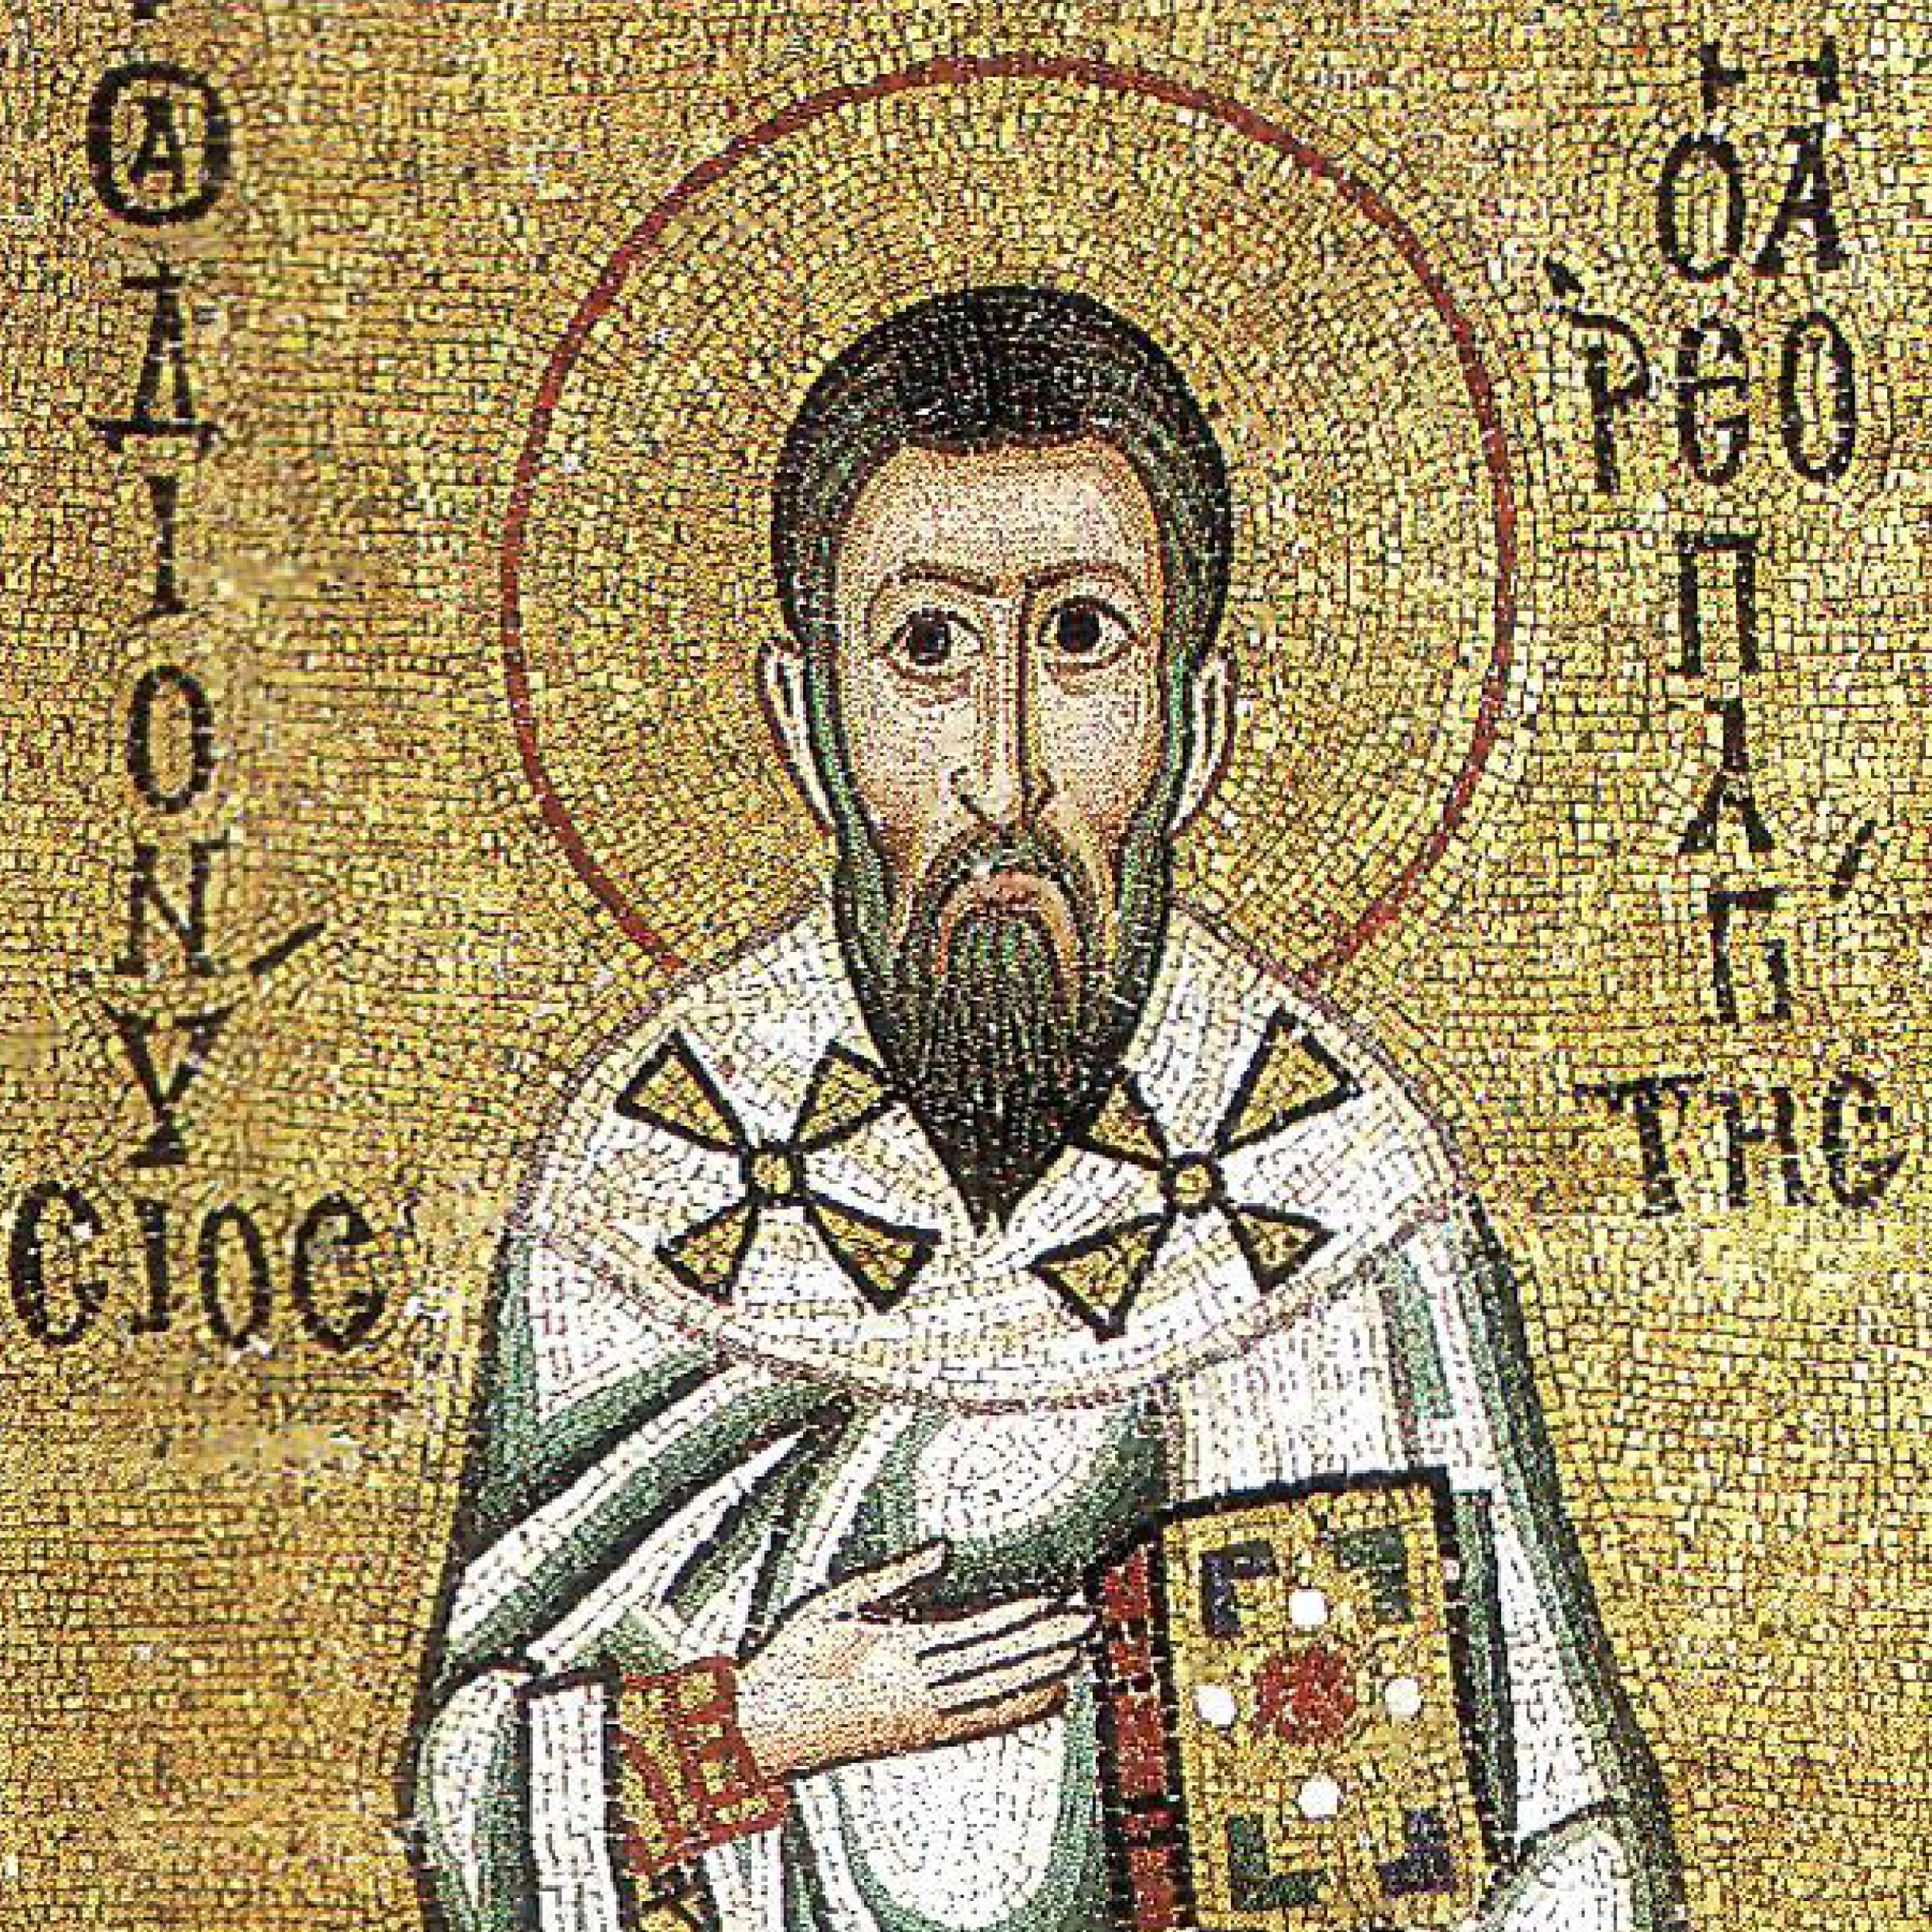 Andrew Louth, The Apophatic in Orthodox Theology